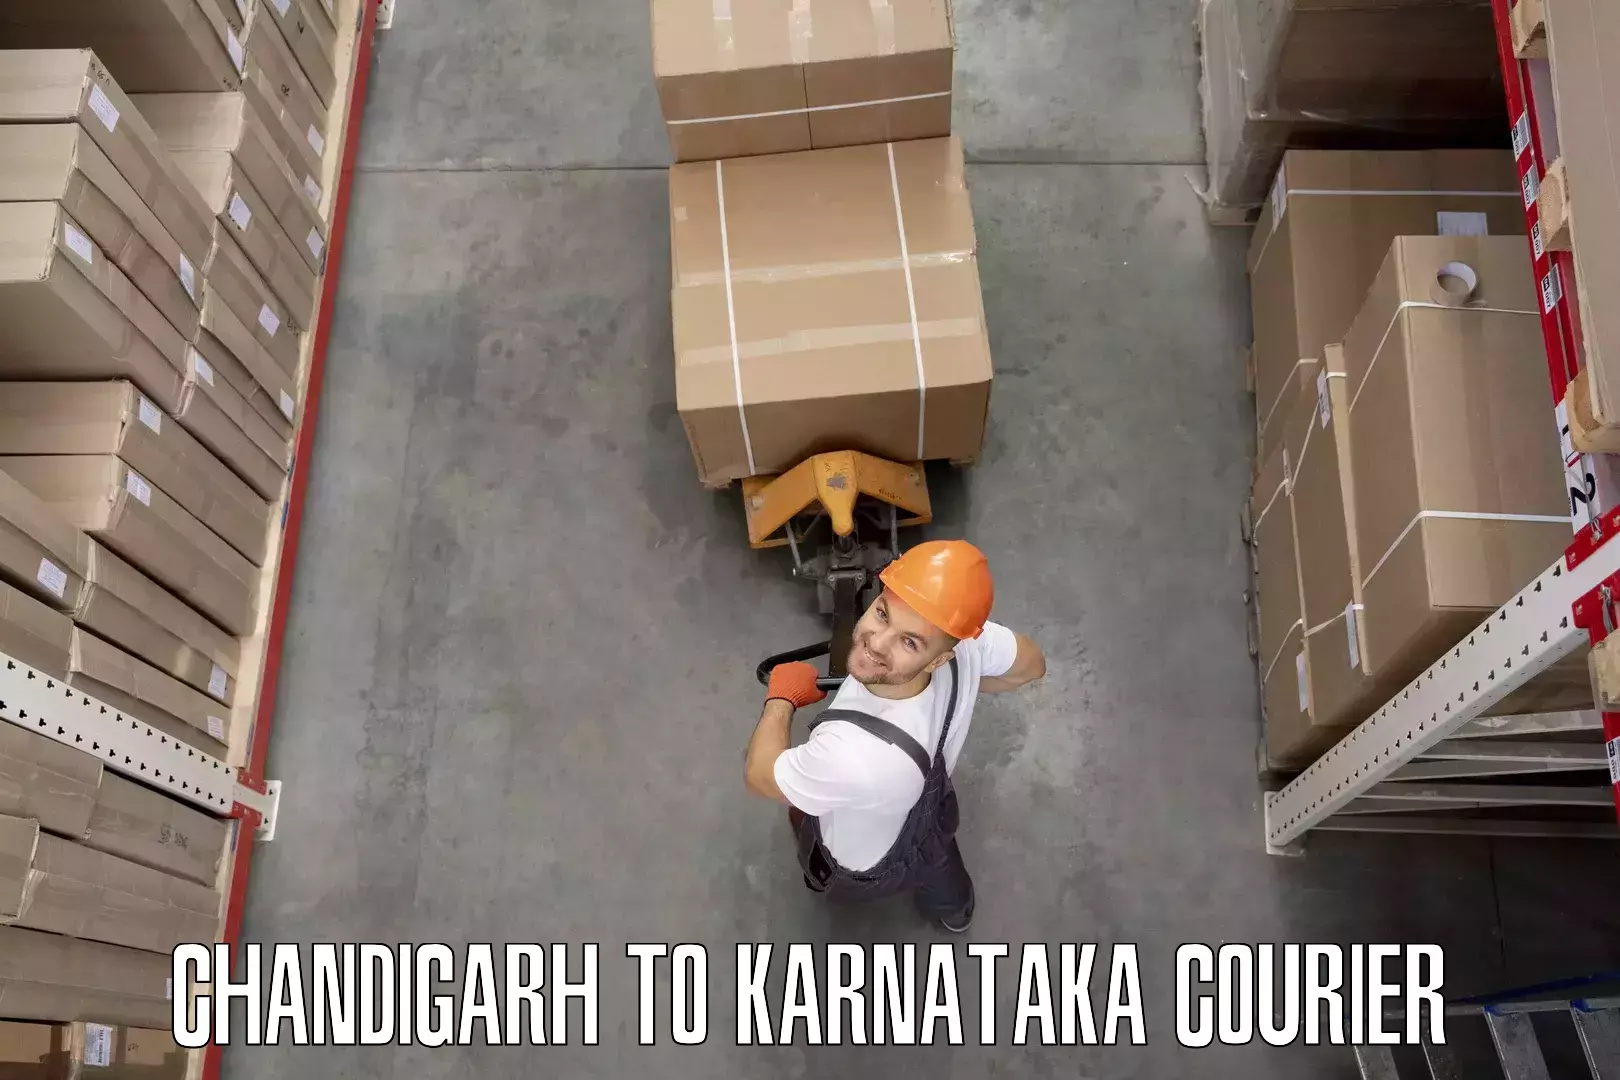 Trusted relocation experts in Chandigarh to Kanjarakatte